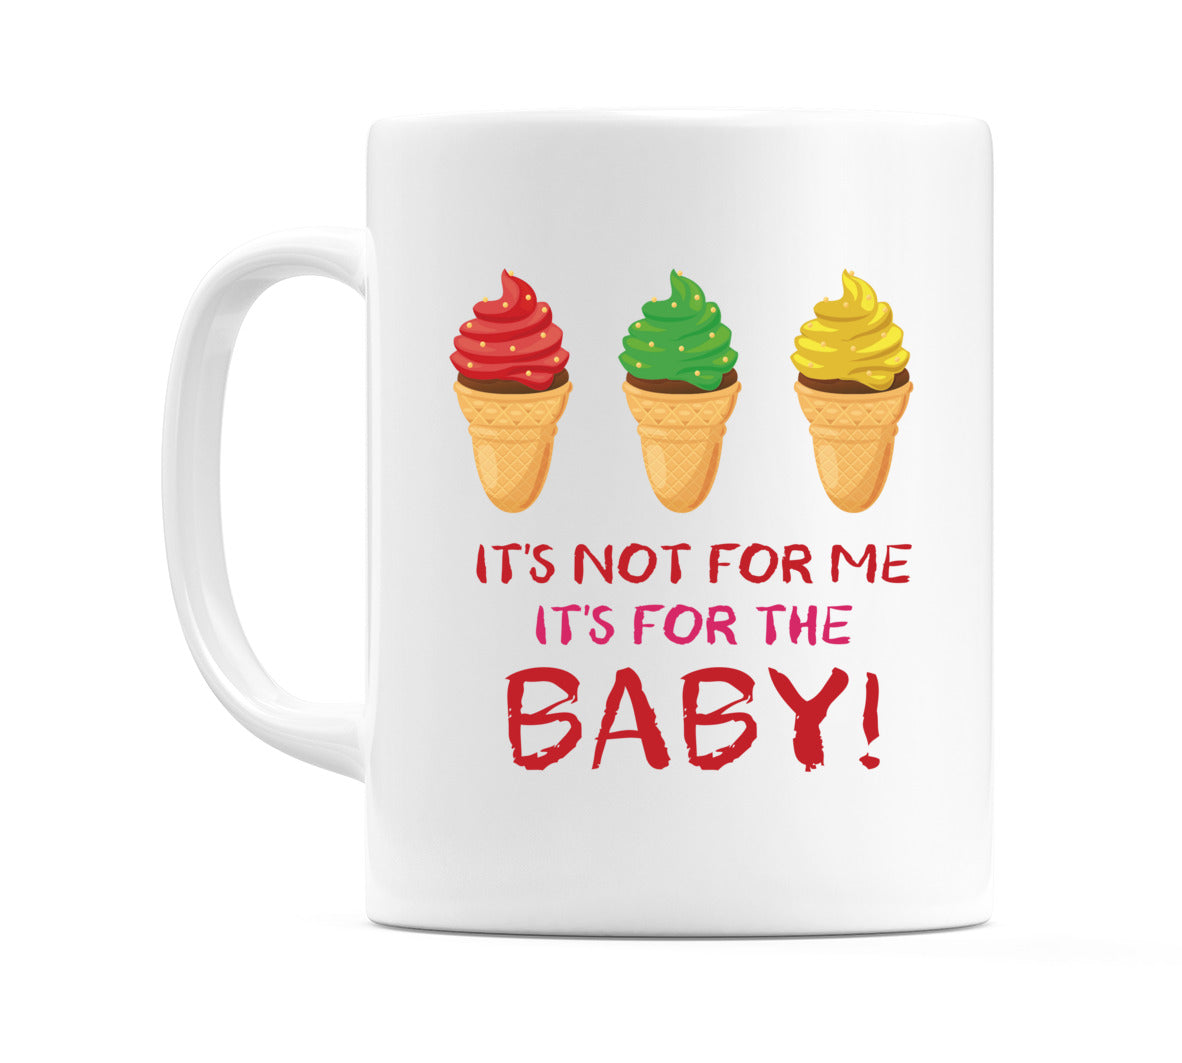 It's Not For Me, It's For The Baby! Mug